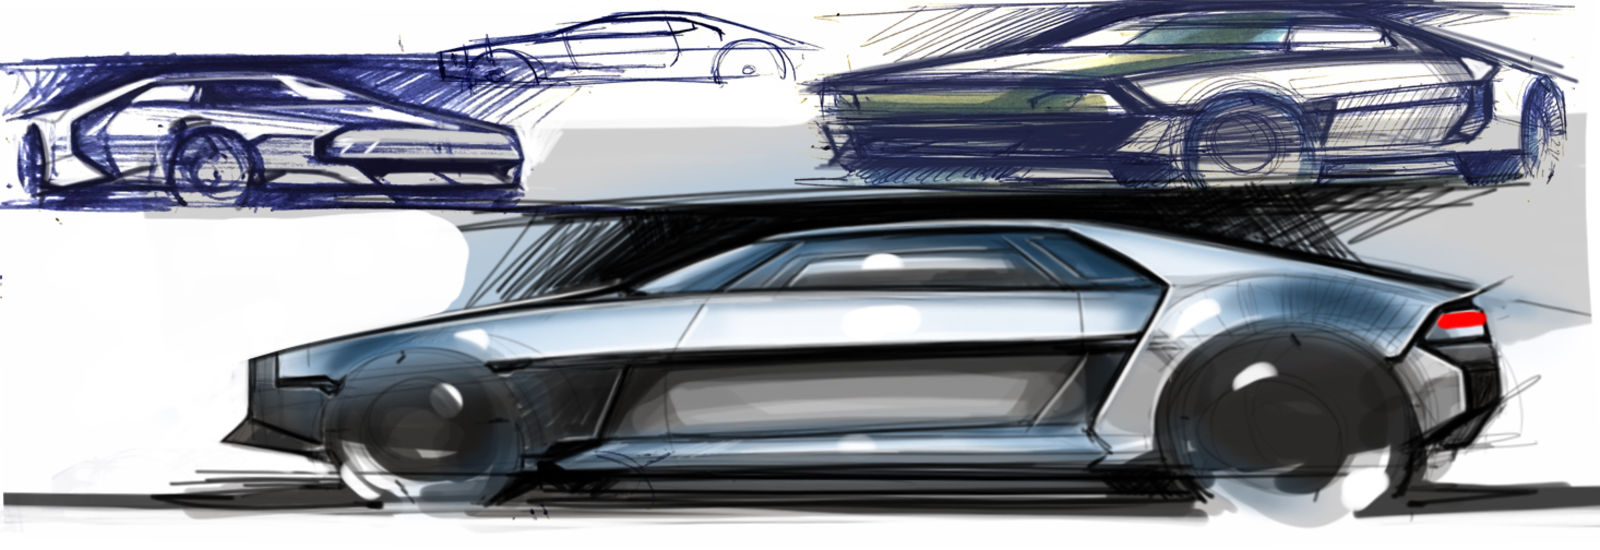 Illustration for article titled First quick sketches of a new DeLorean